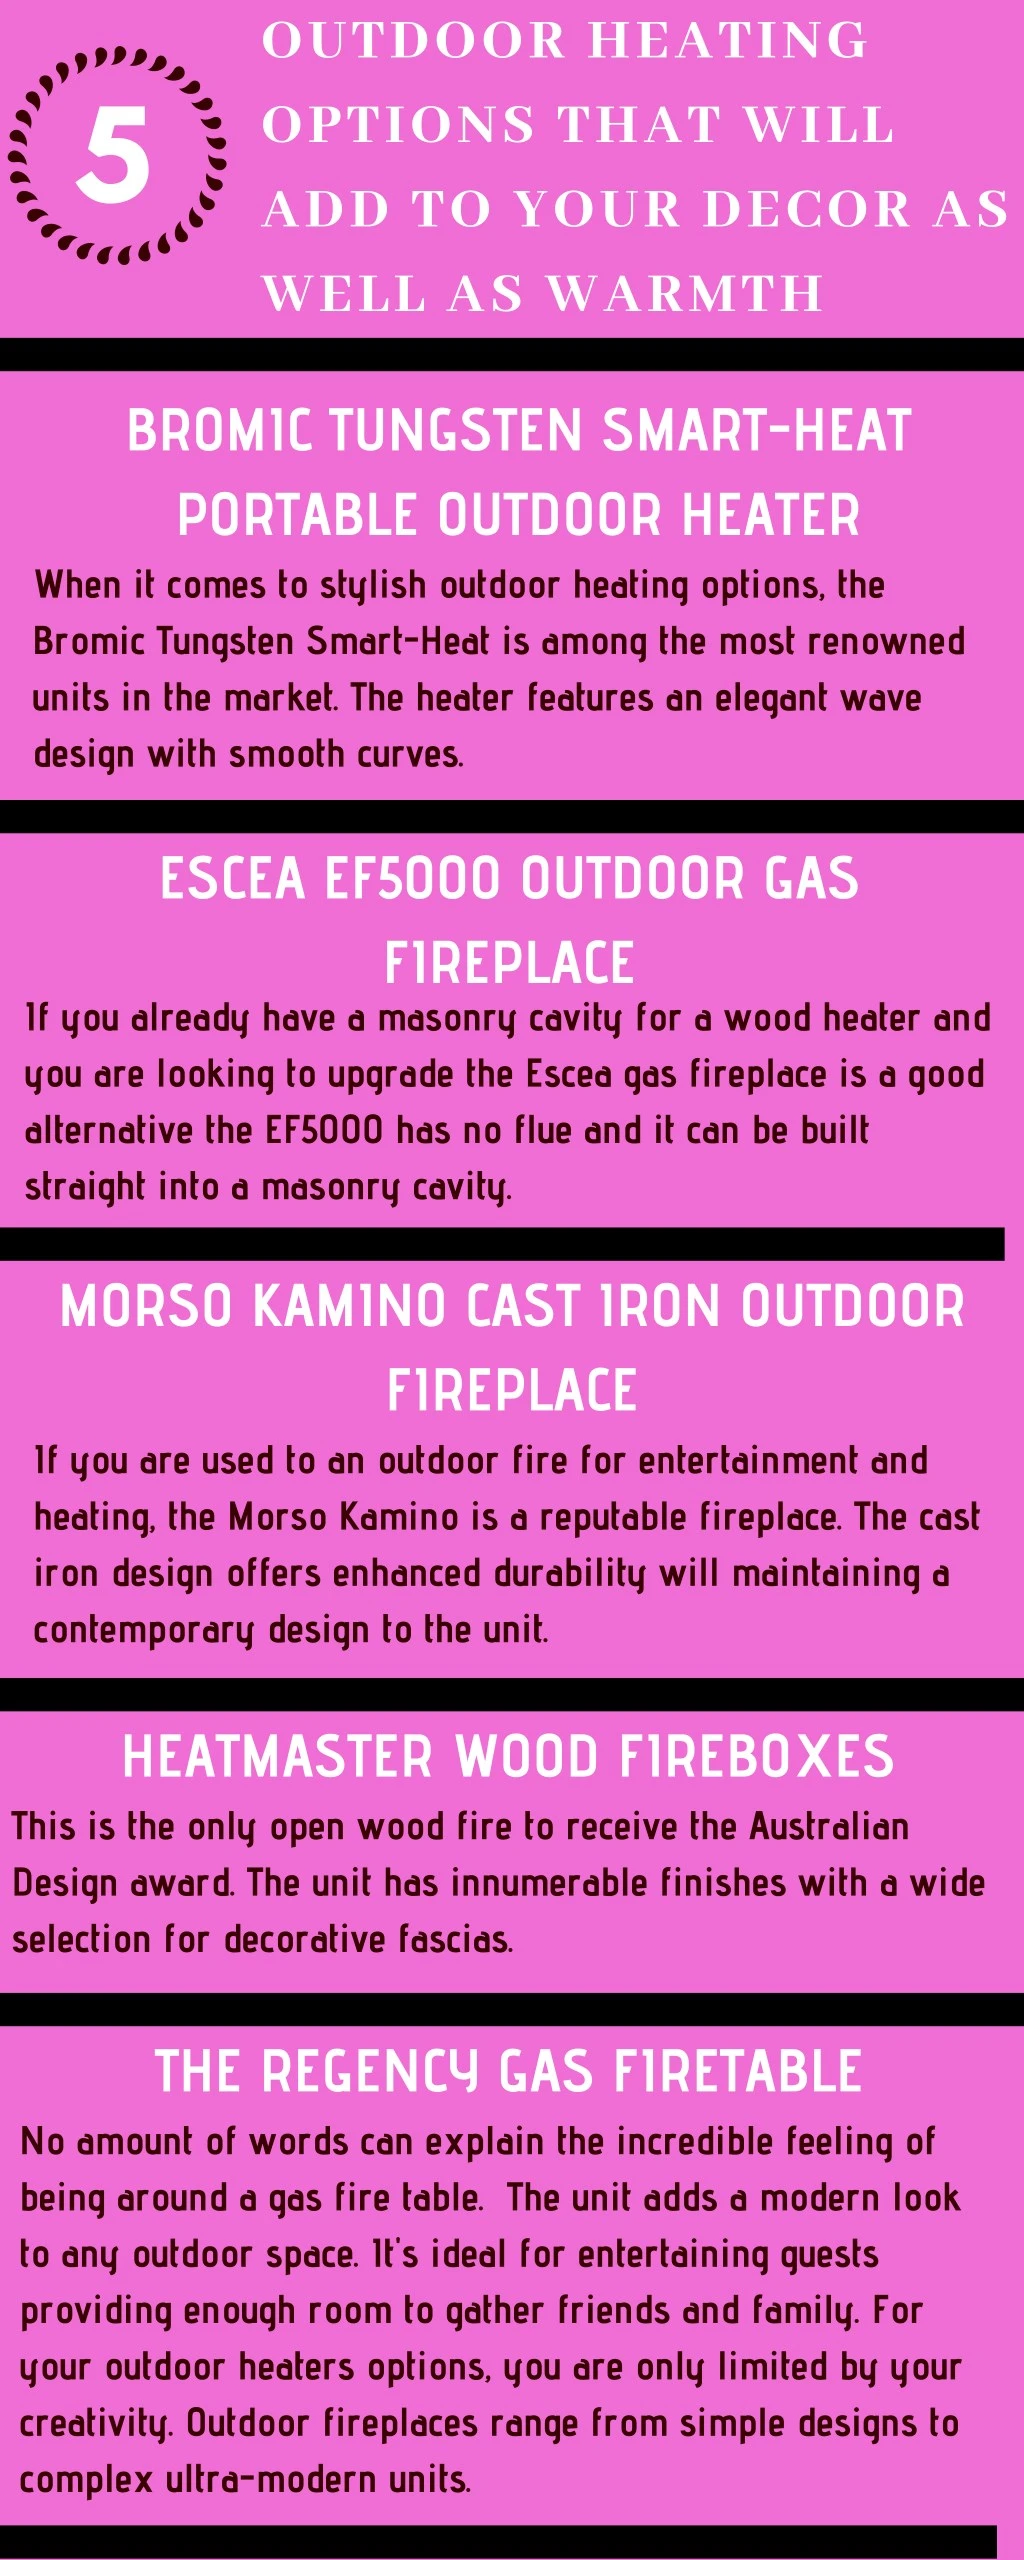 outdoor heating options that will add to your